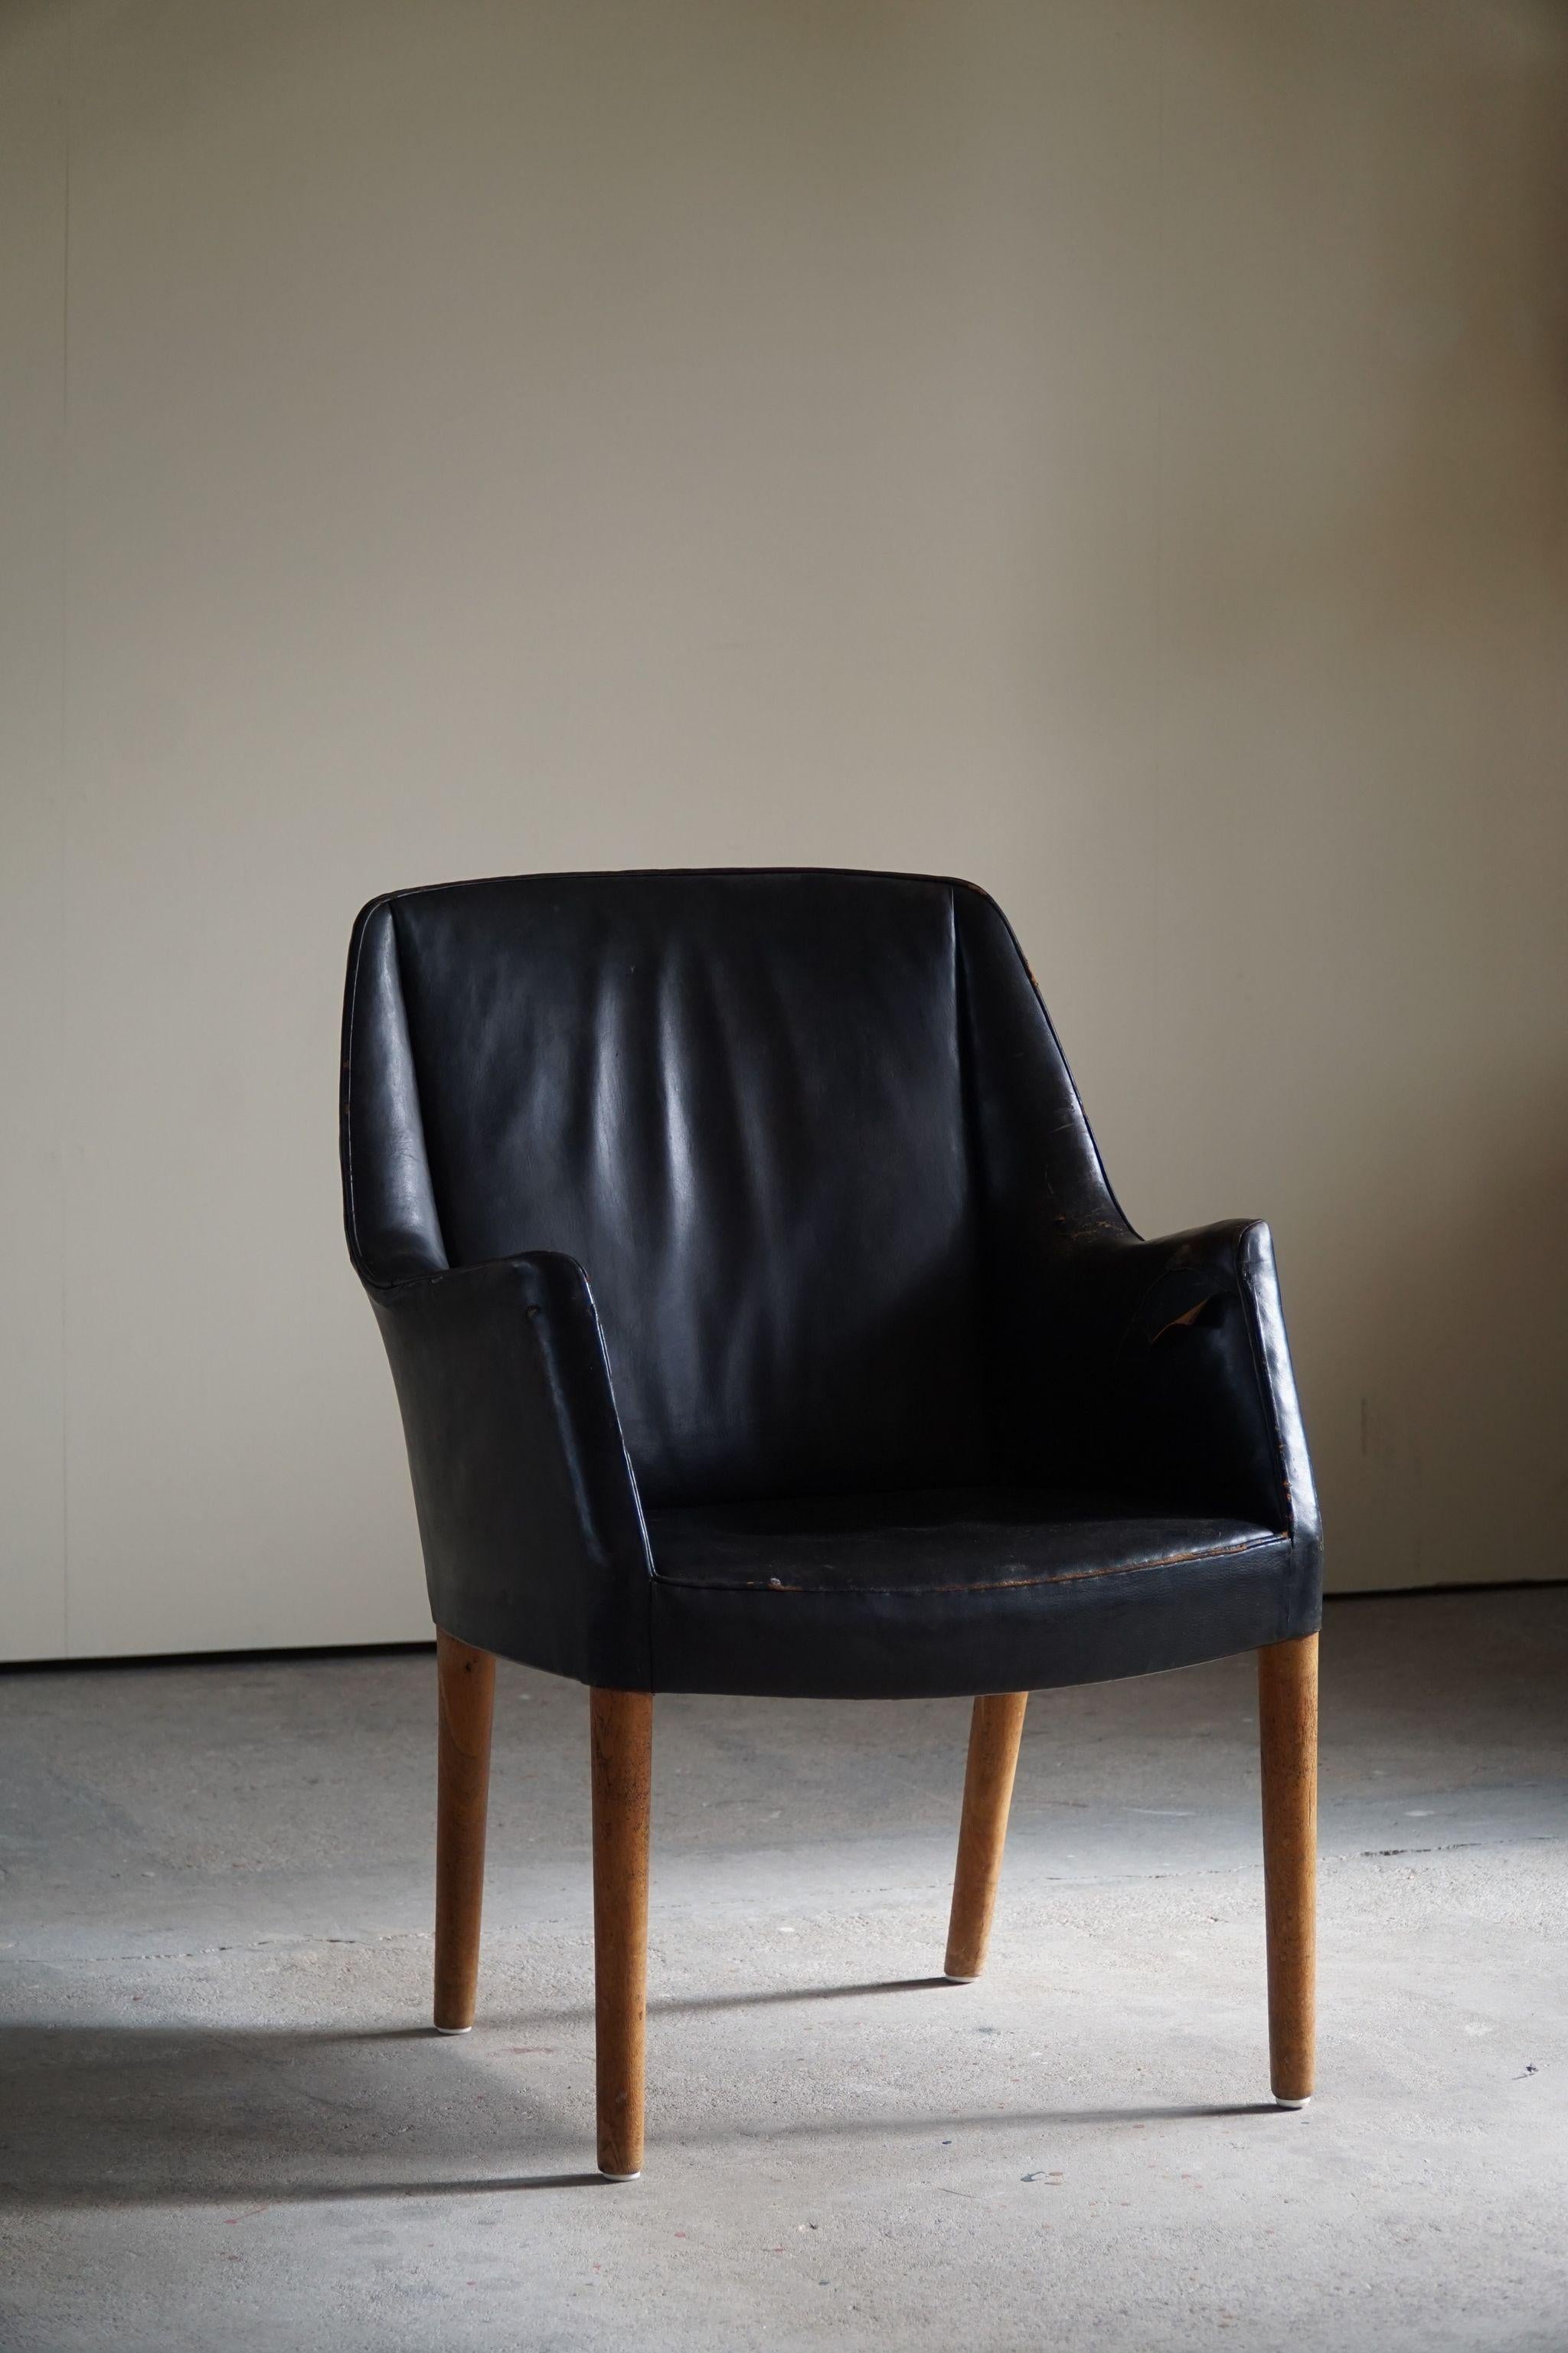 Rare armchair in oak and nicely patinated black leather. Designed by Nanna Ditzel for Copenhagen county court. This example is only made in a few examples and therefore a rare collectible item. 

Documented by a Danish auction house Bruun